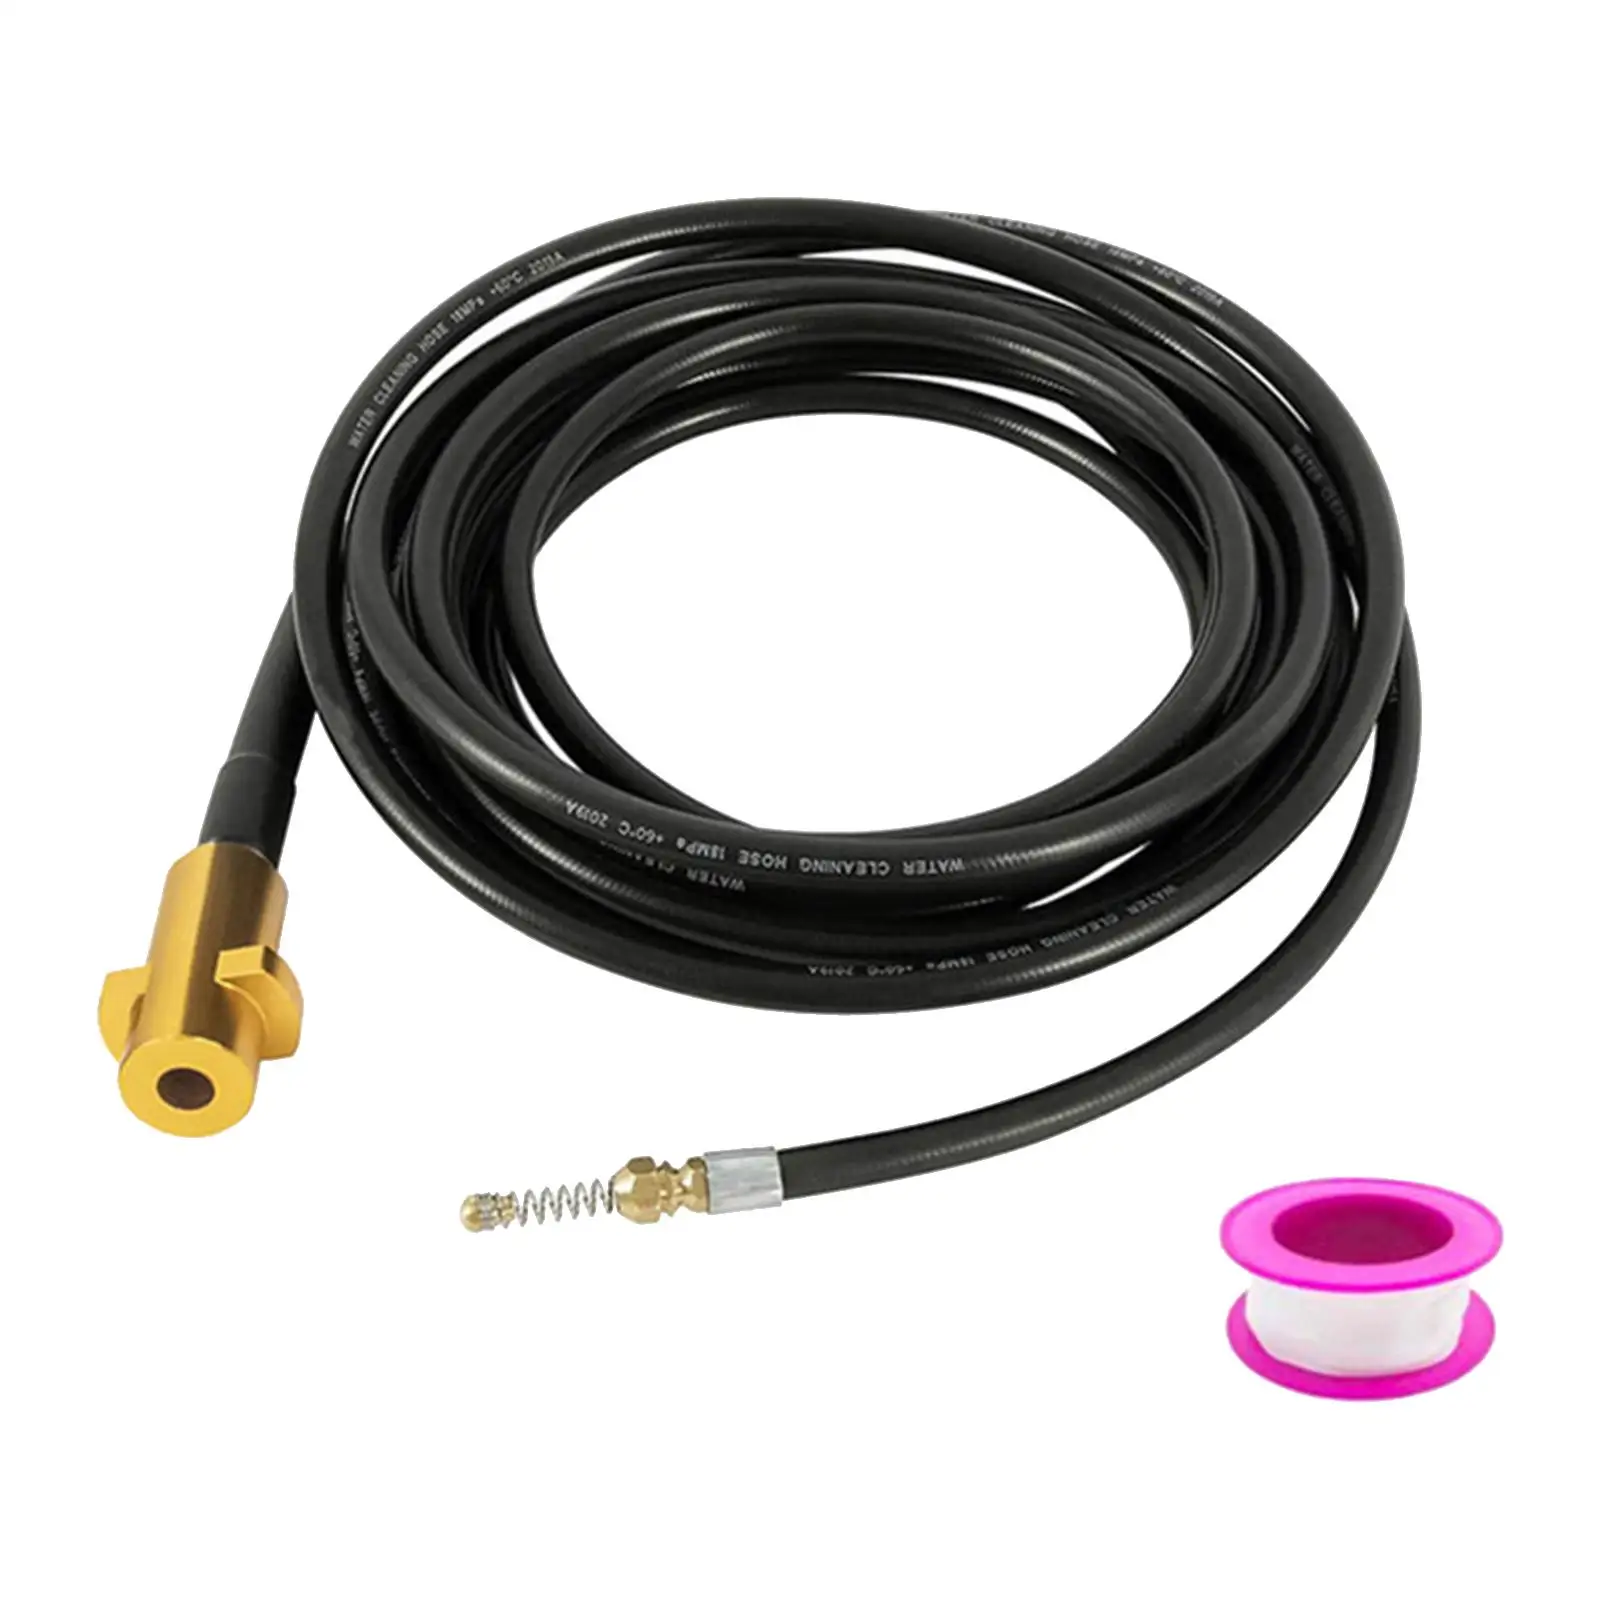 High Pressure Washer Hose Washer Hose 2320PSI Devices Car Washer Hose for Cleaning Car Garden Lawn for K Series K2-k7